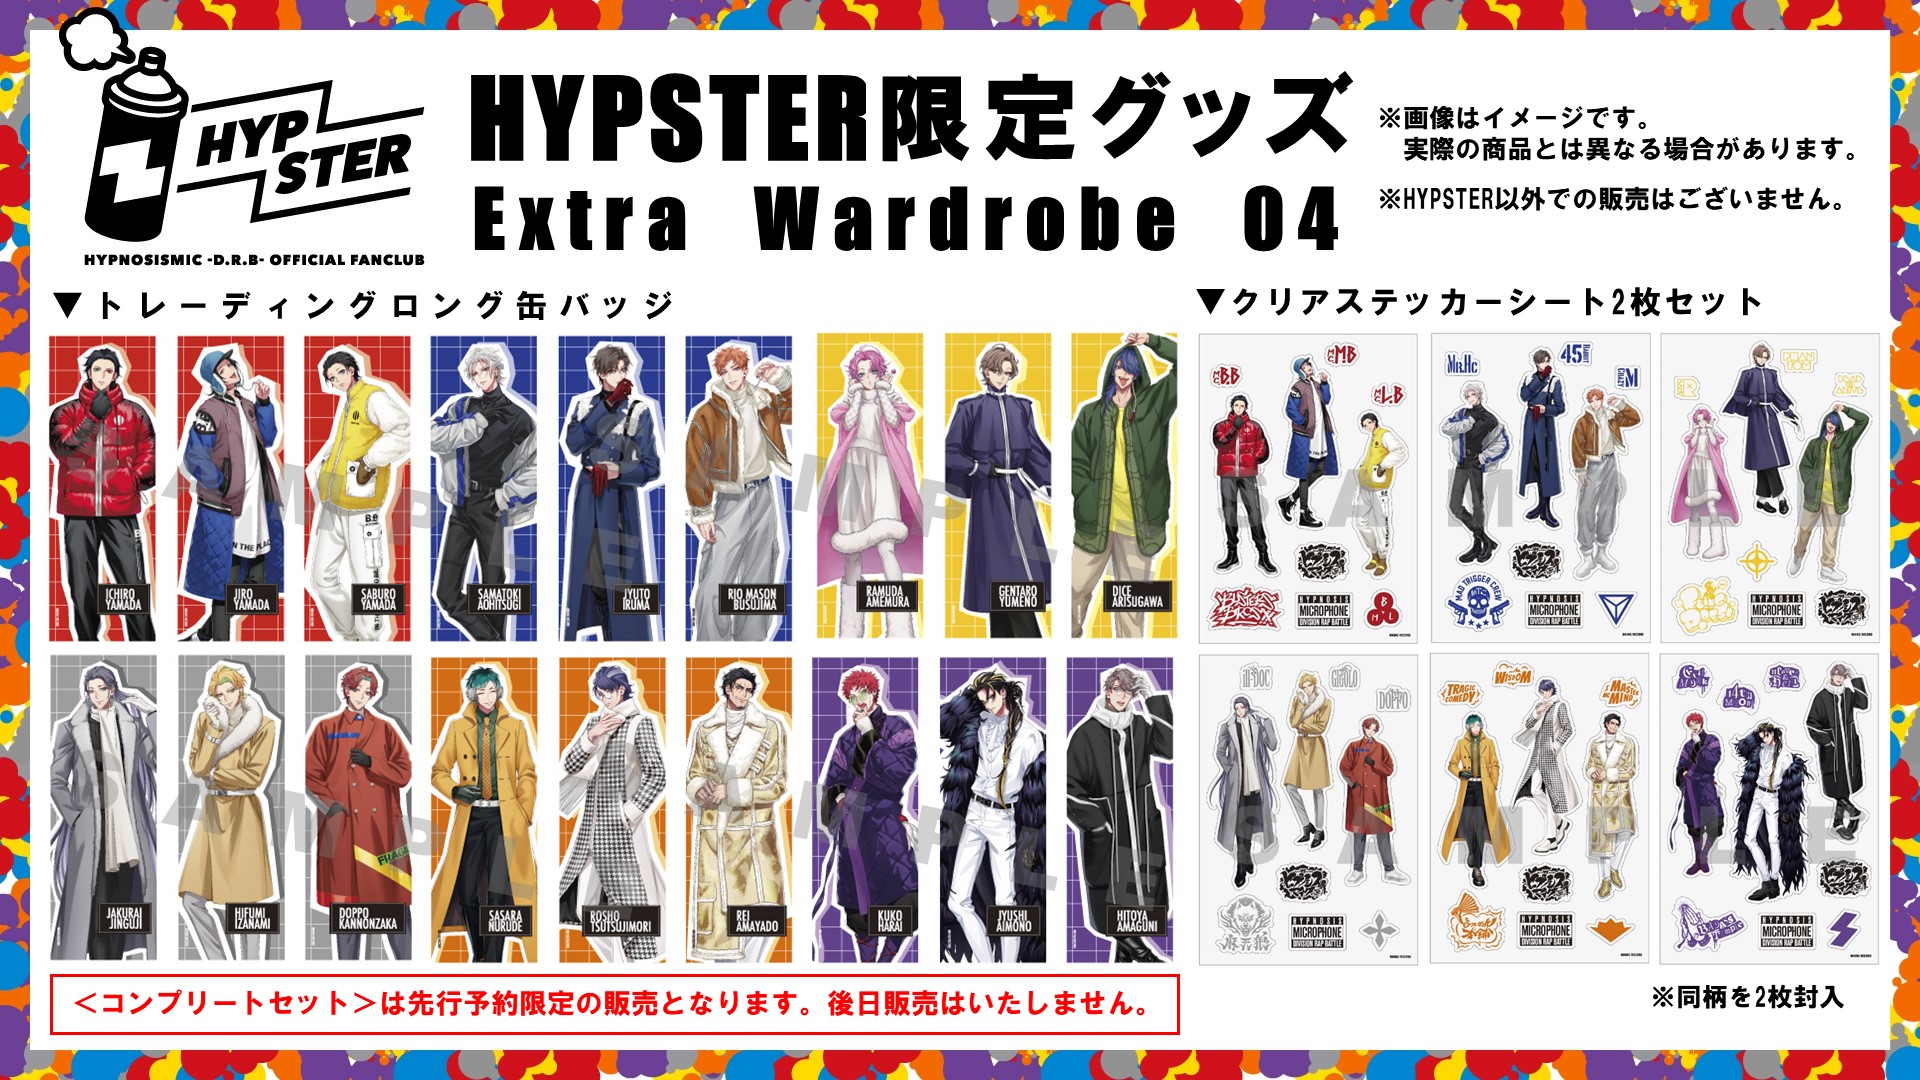 HYPSTER Limited Store販売情報(9月28日更新)｜HYPSTER｜HYPNOSISMIC